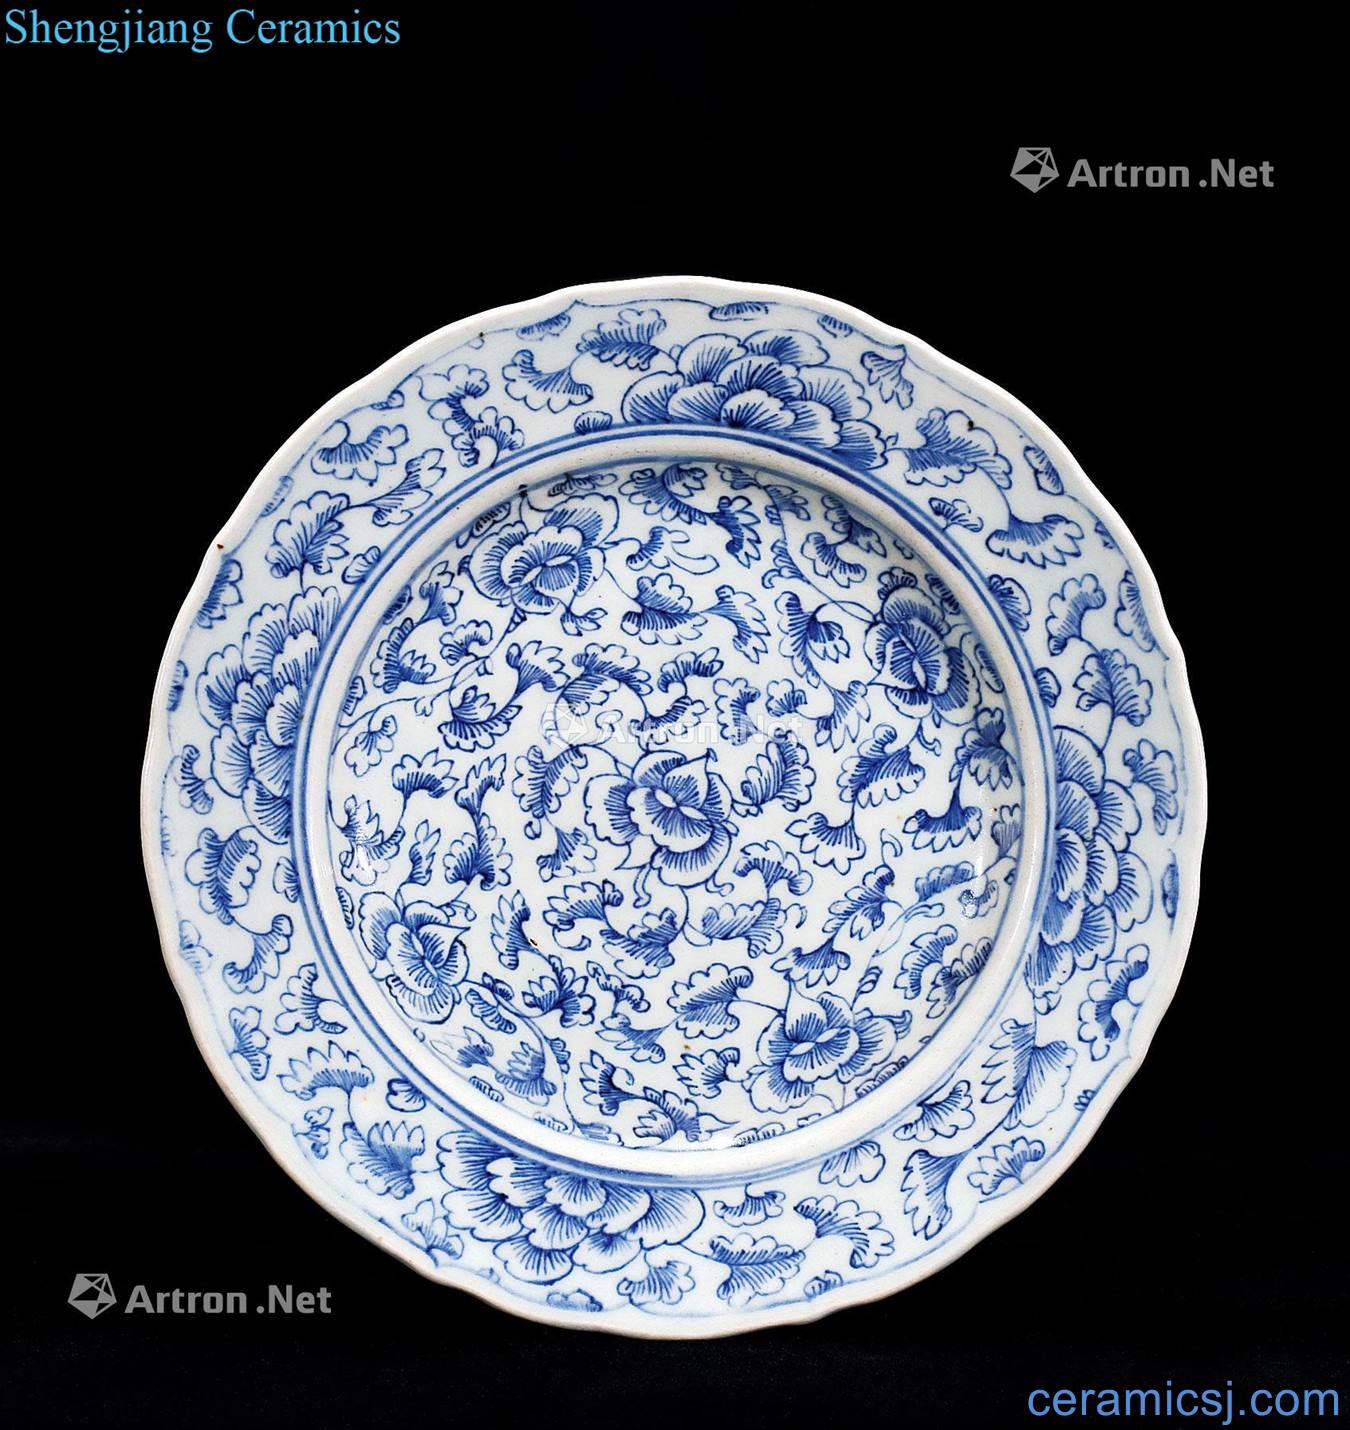 Qing dynasty blue and white peony grains kwai plate